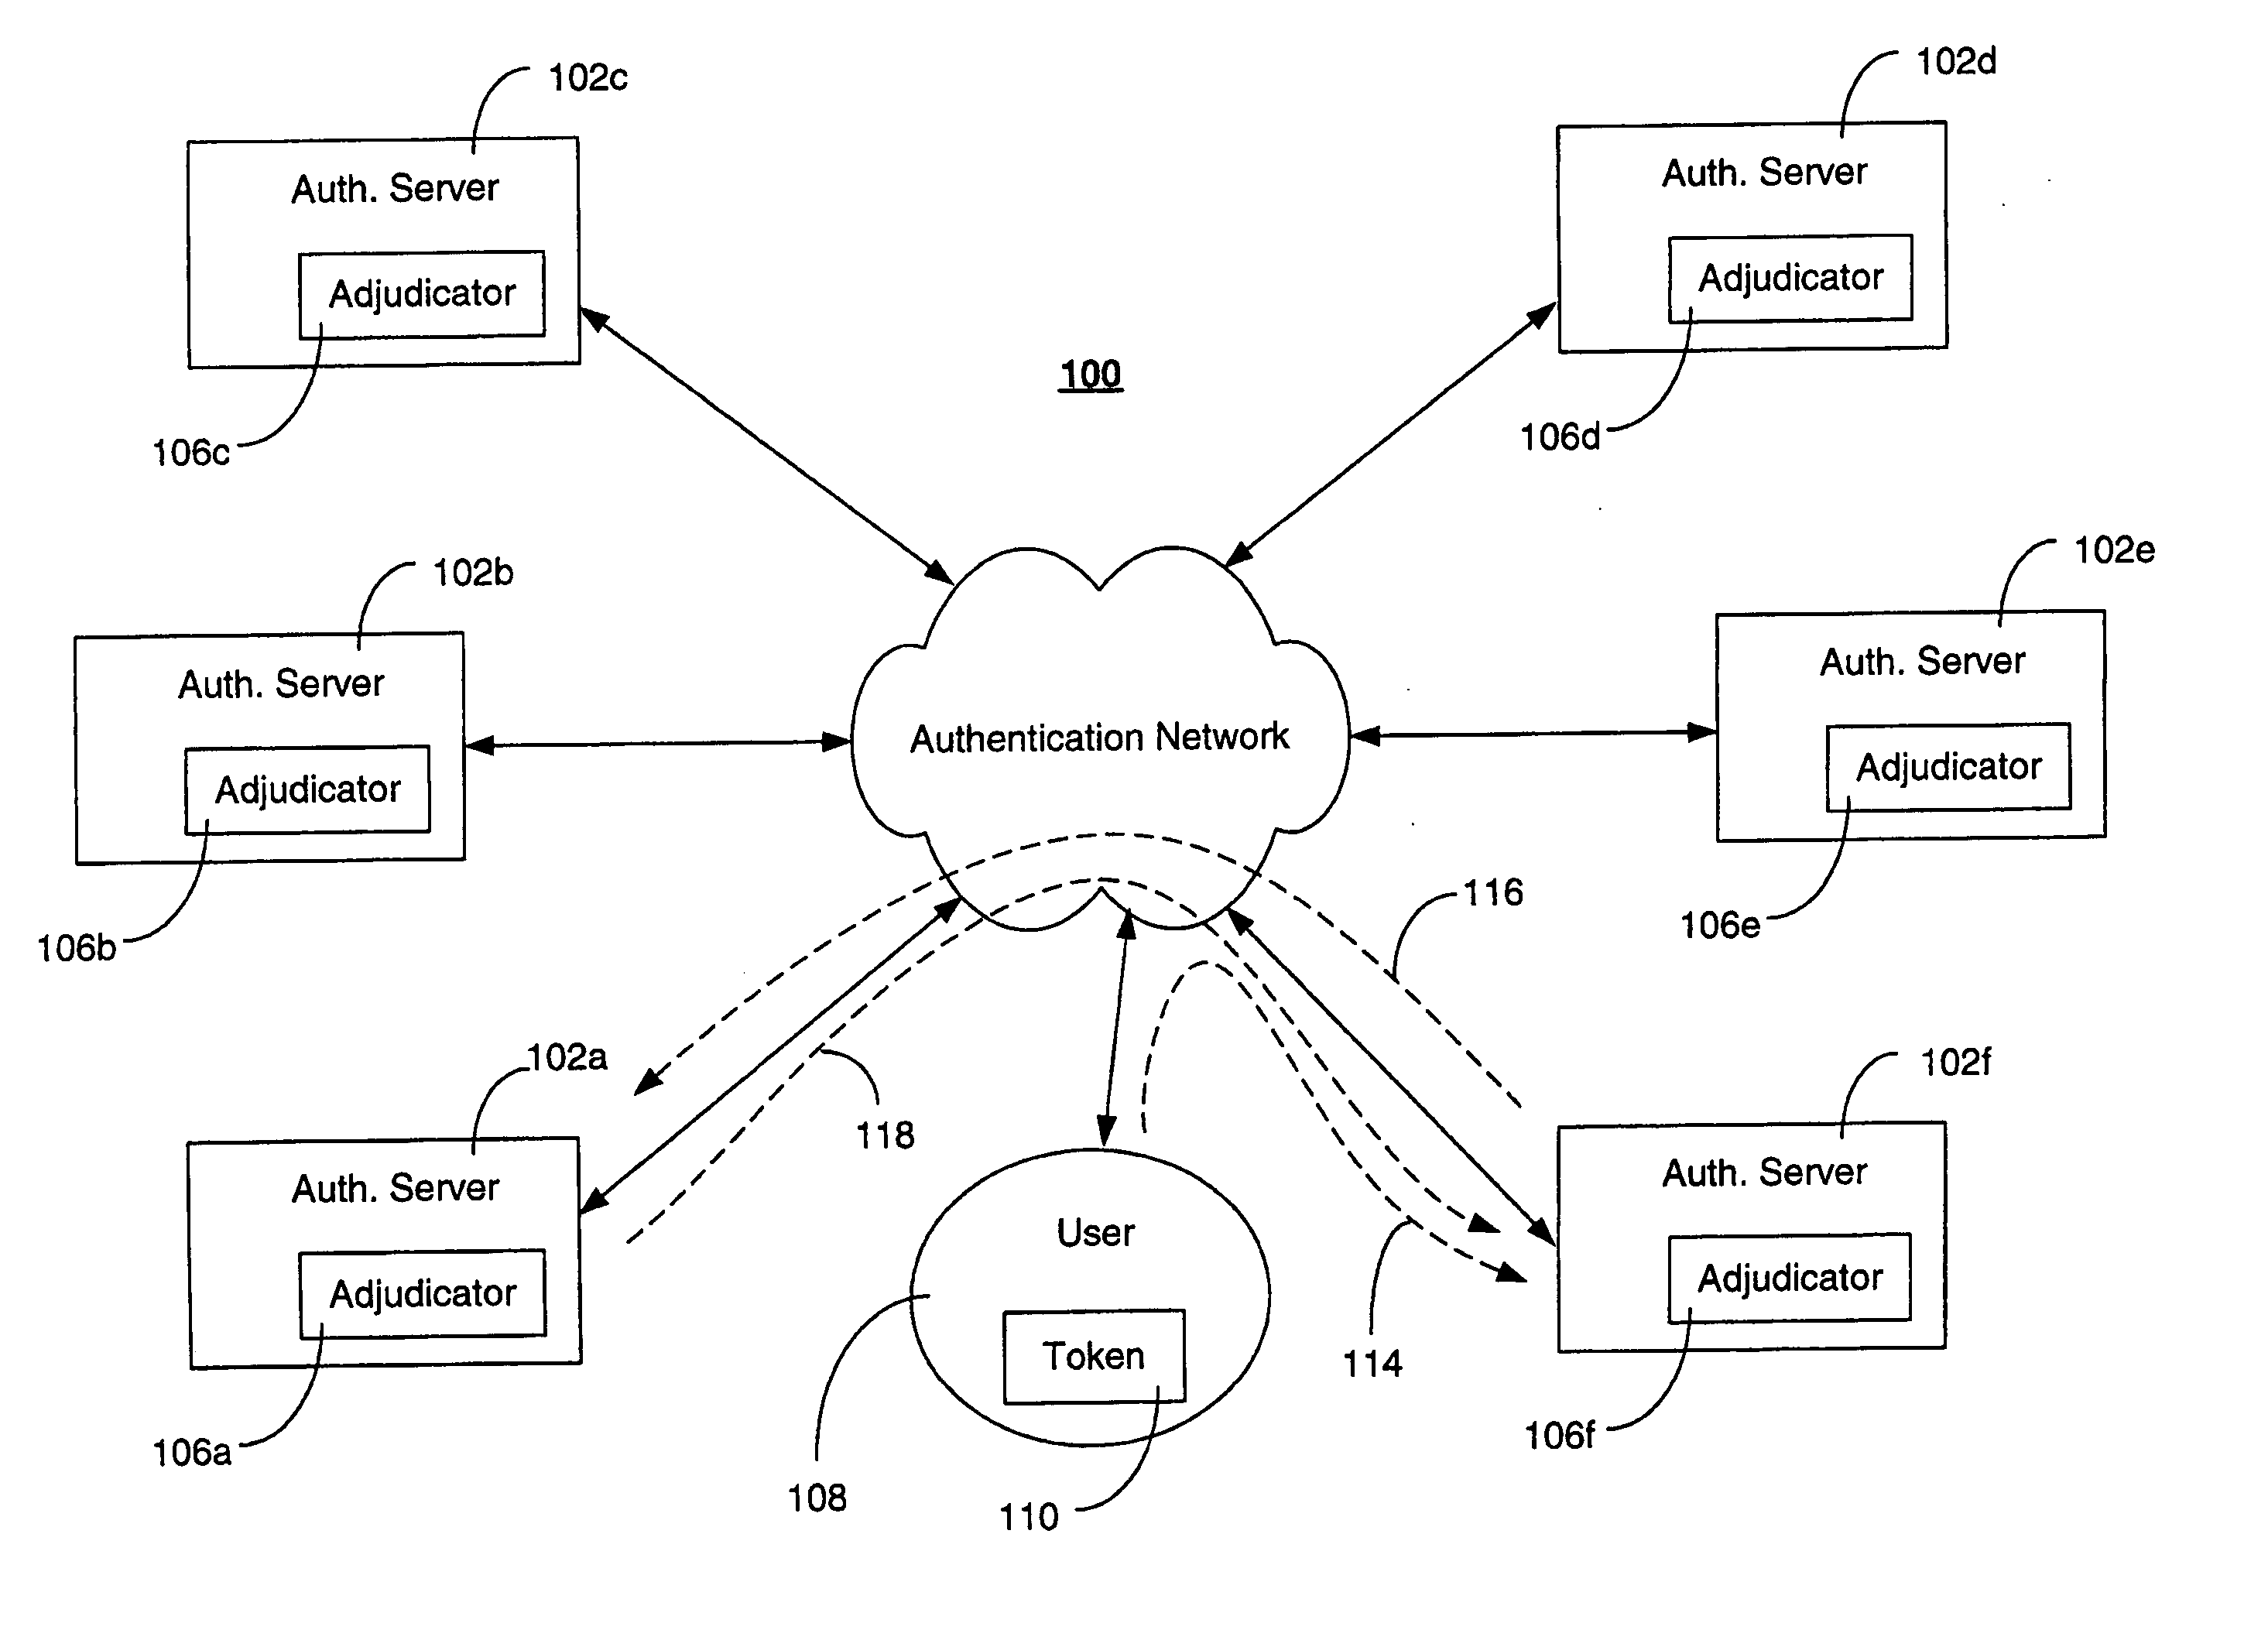 Detecting and preventing replay in authentication systems